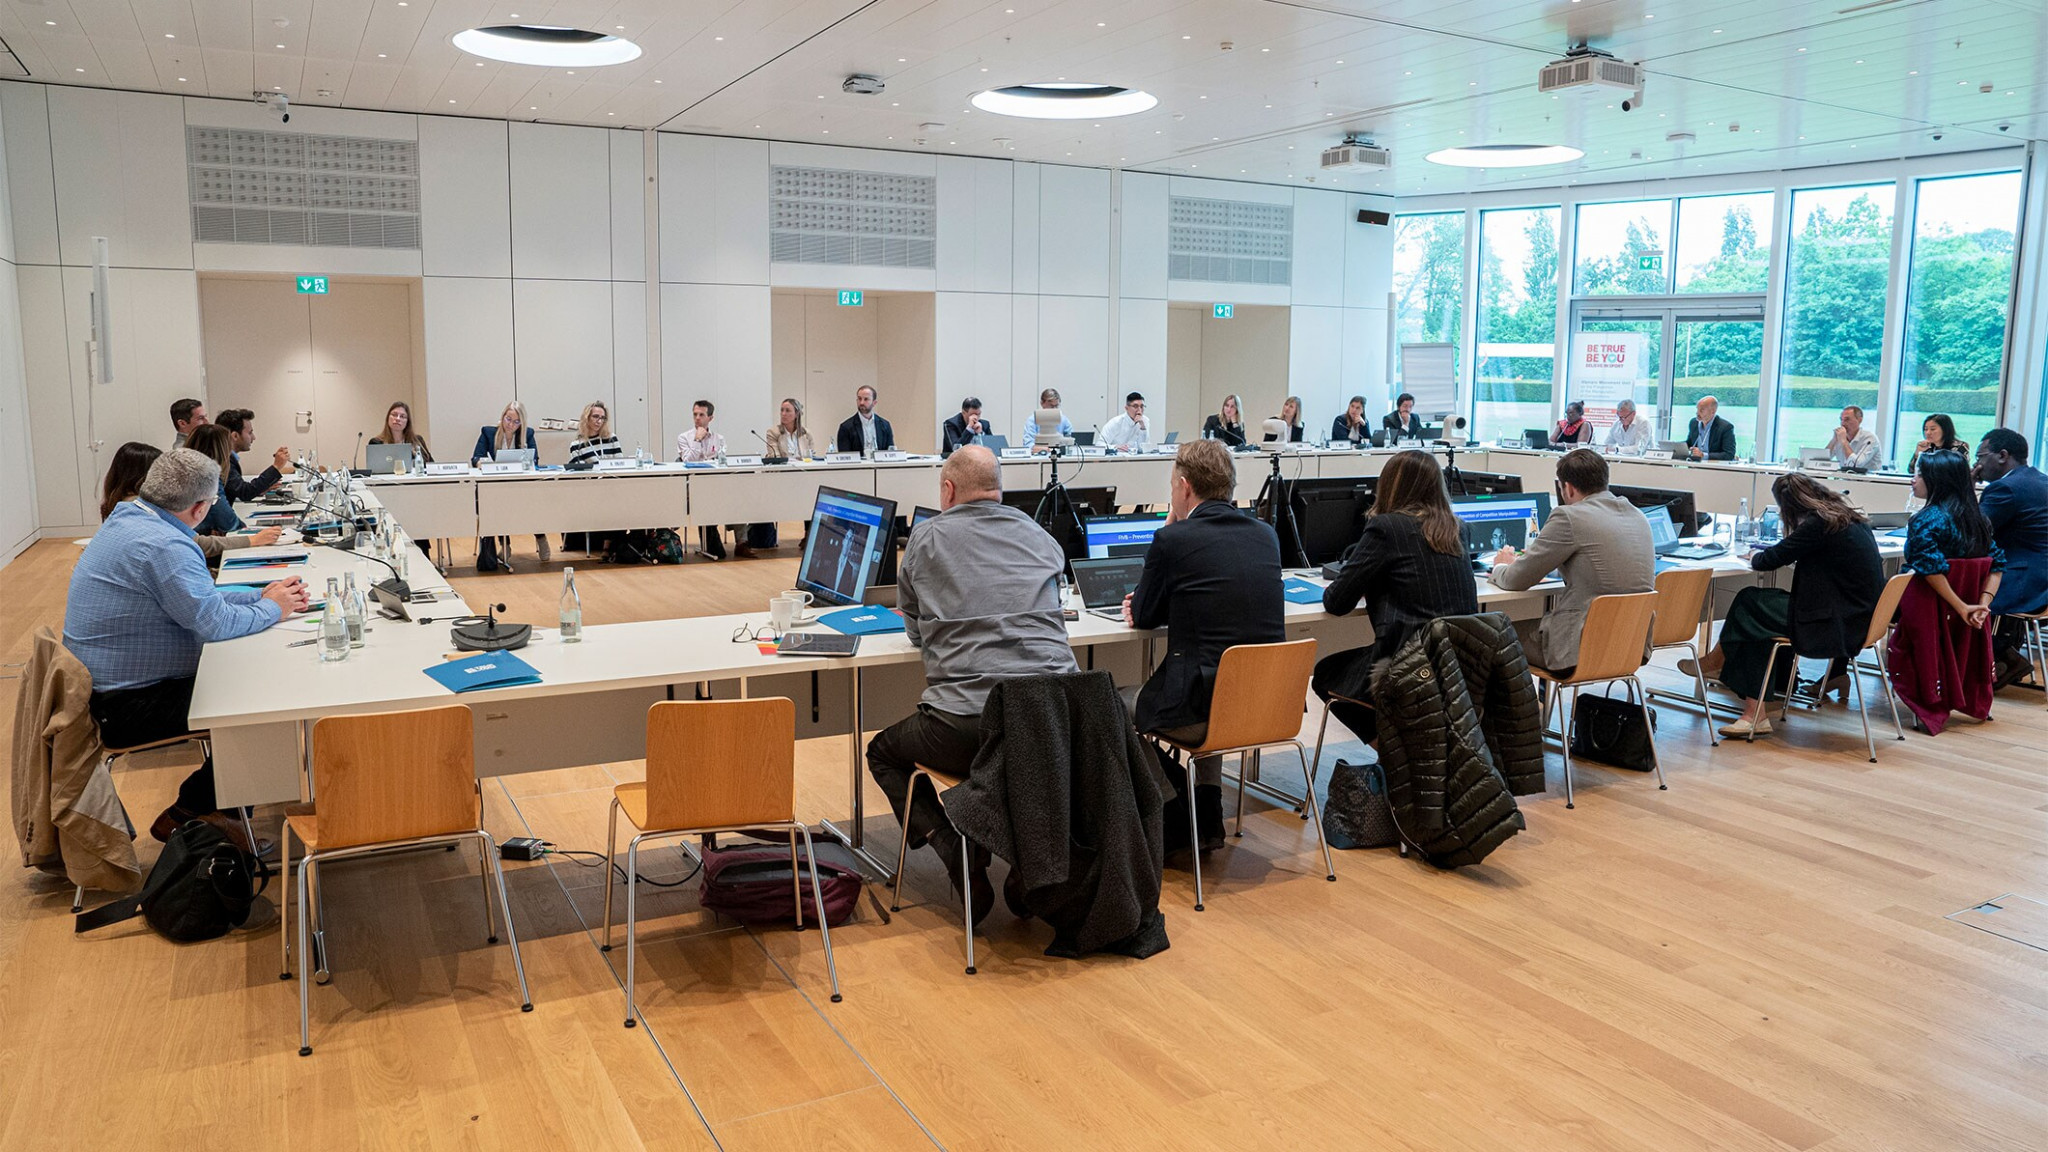 A total of 37 International Federations were represented at the recent workshop held in Lausanne by the the Olympic Movement Unit on the Prevention of the Manipulation of Competitions ©IOC